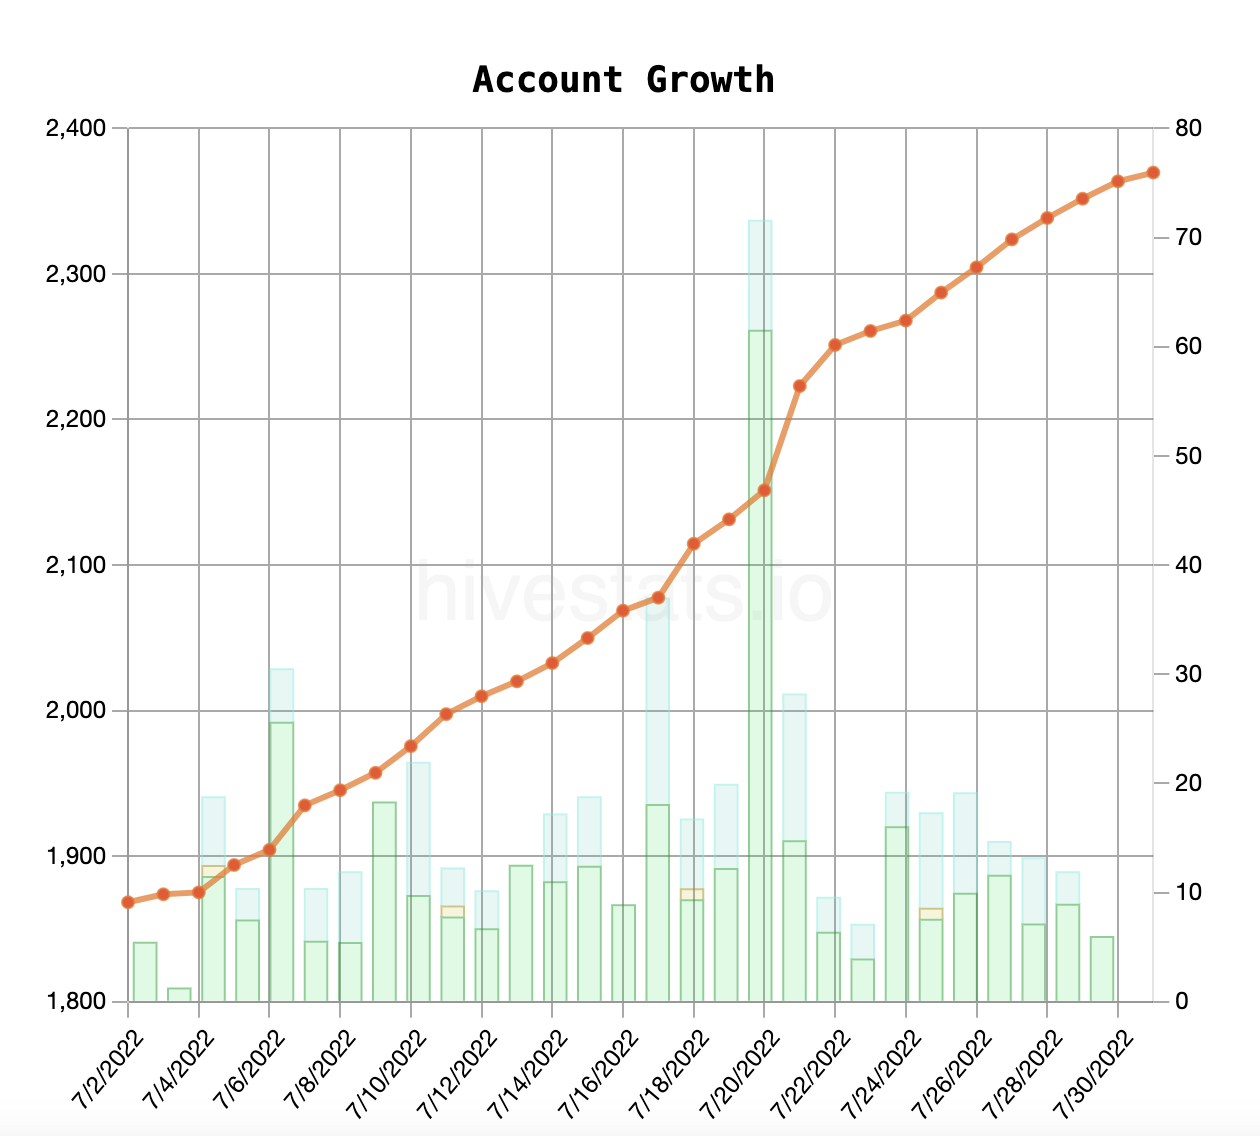 HiveAccountGrowth_July2022.png